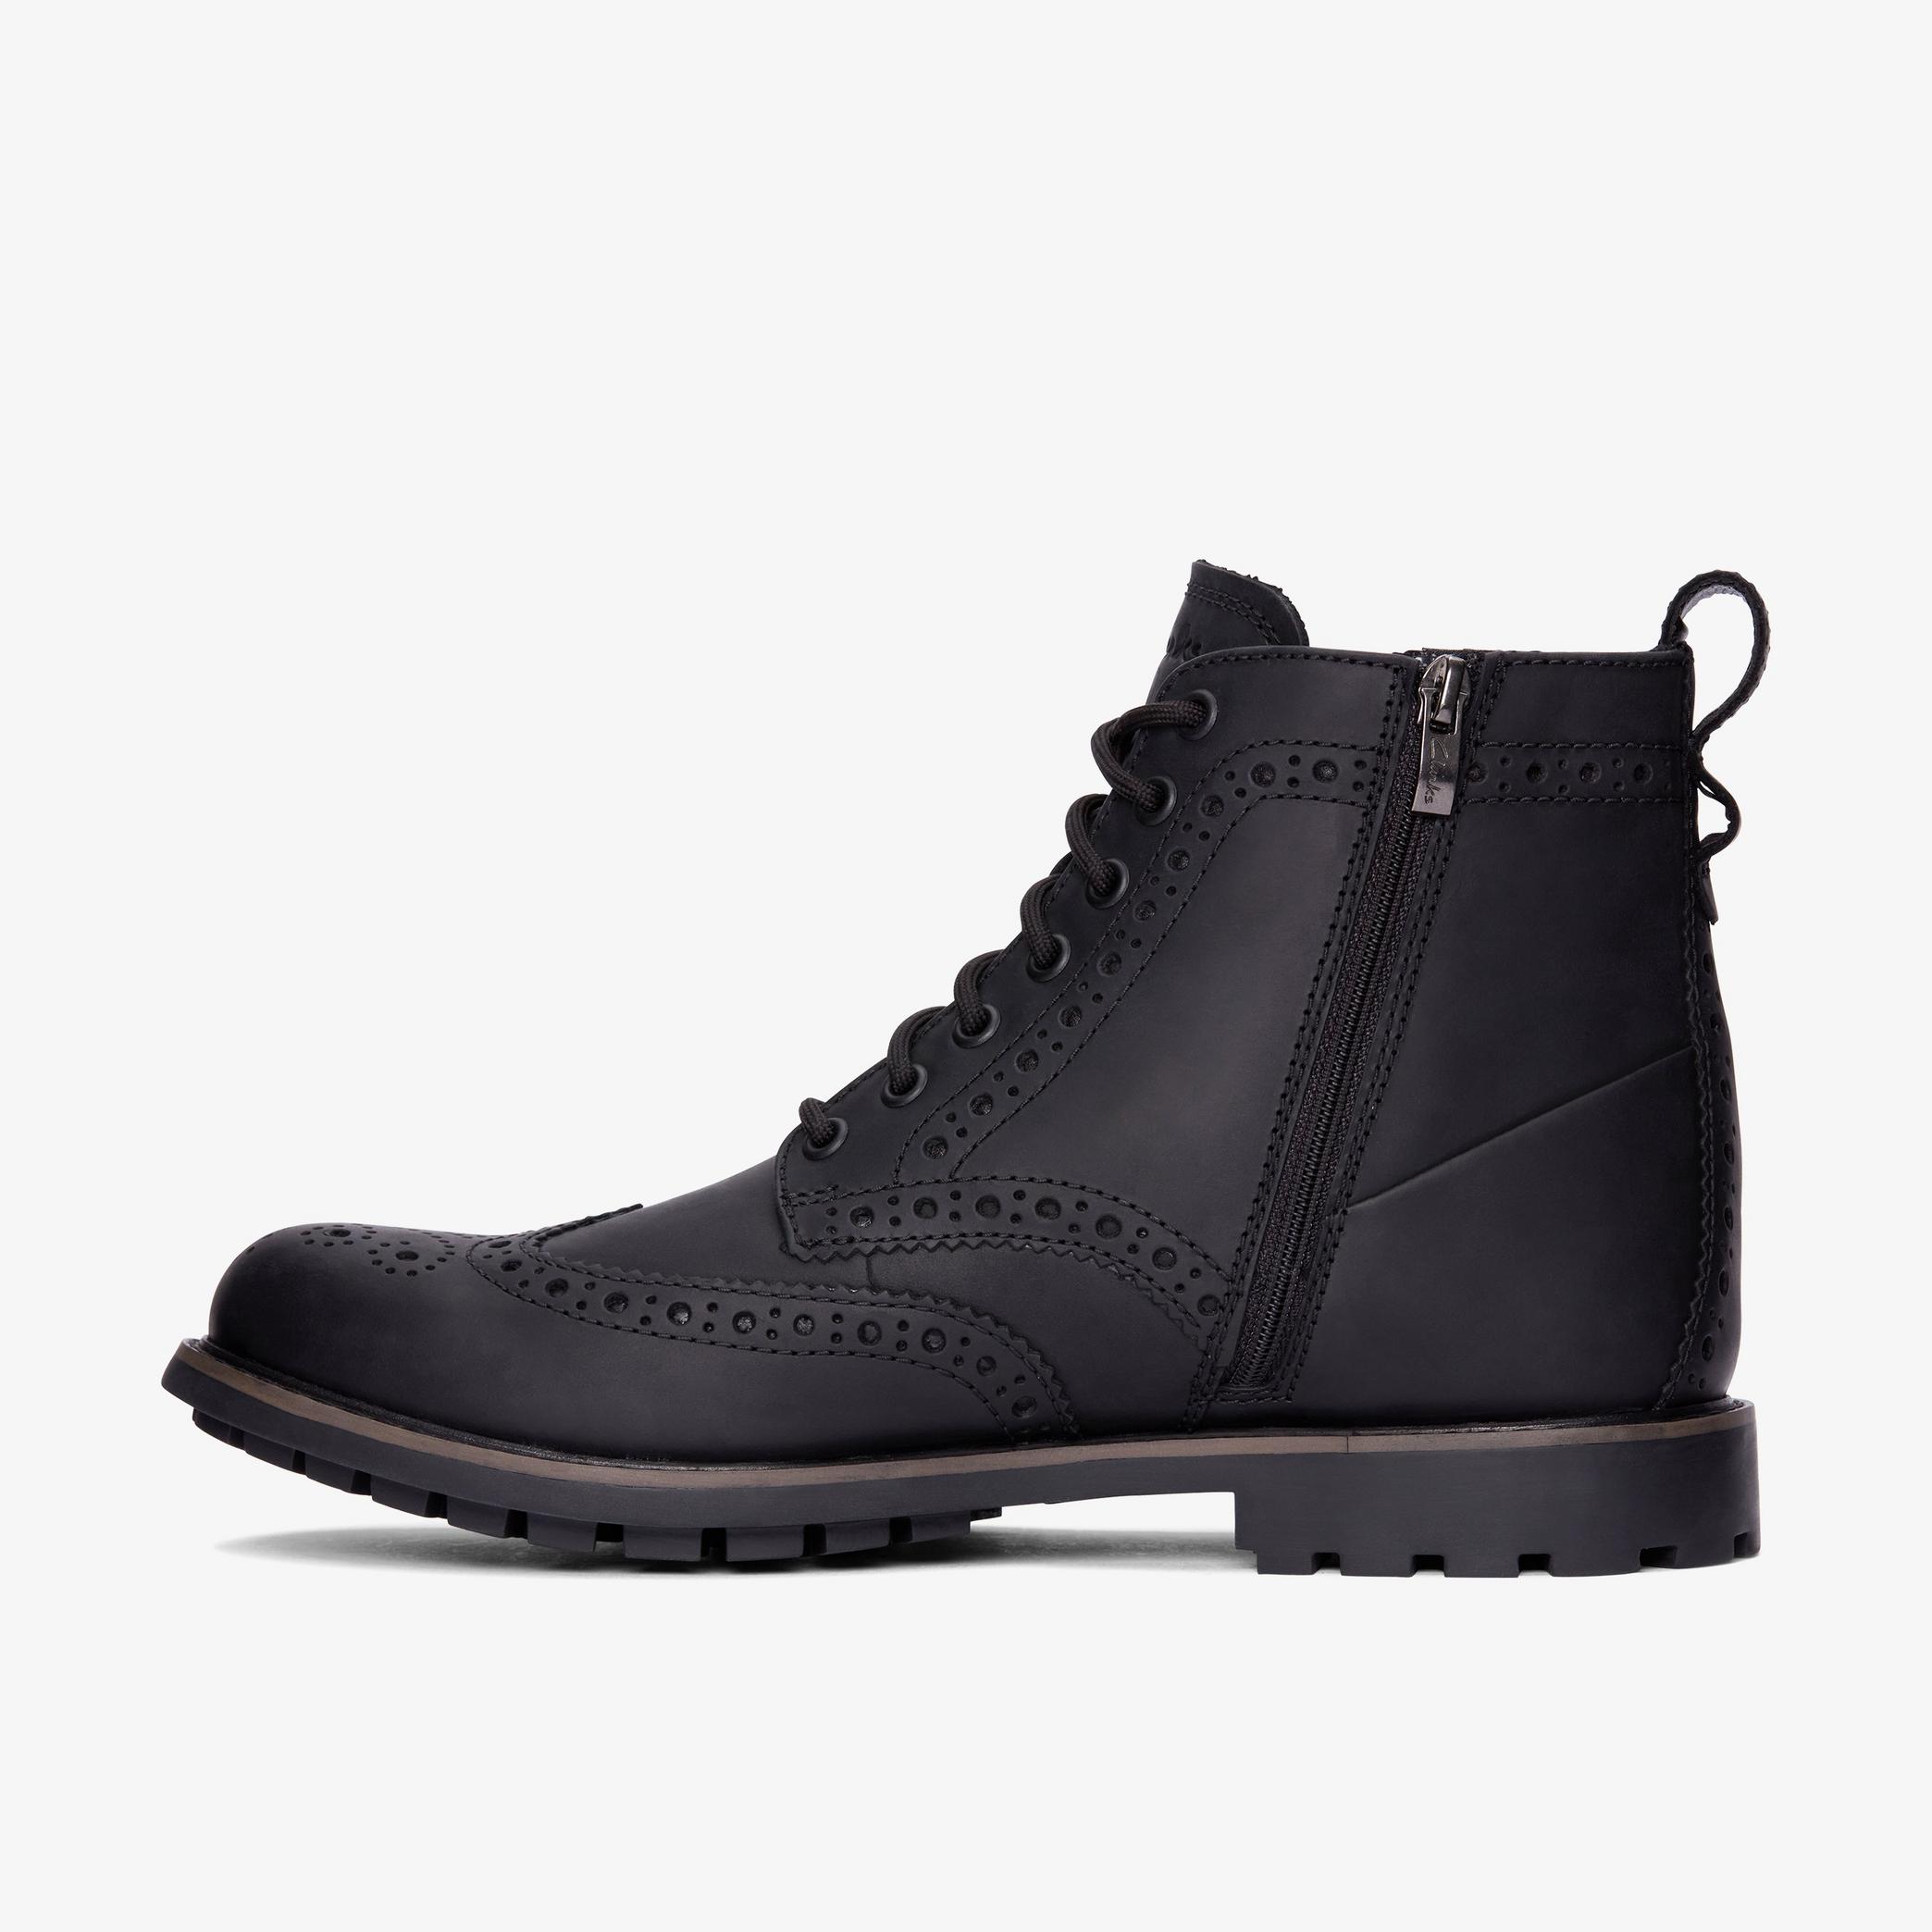 MENS Westcombe Limit Black Warmlined Leather Ankle Boots | Clarks Outlet